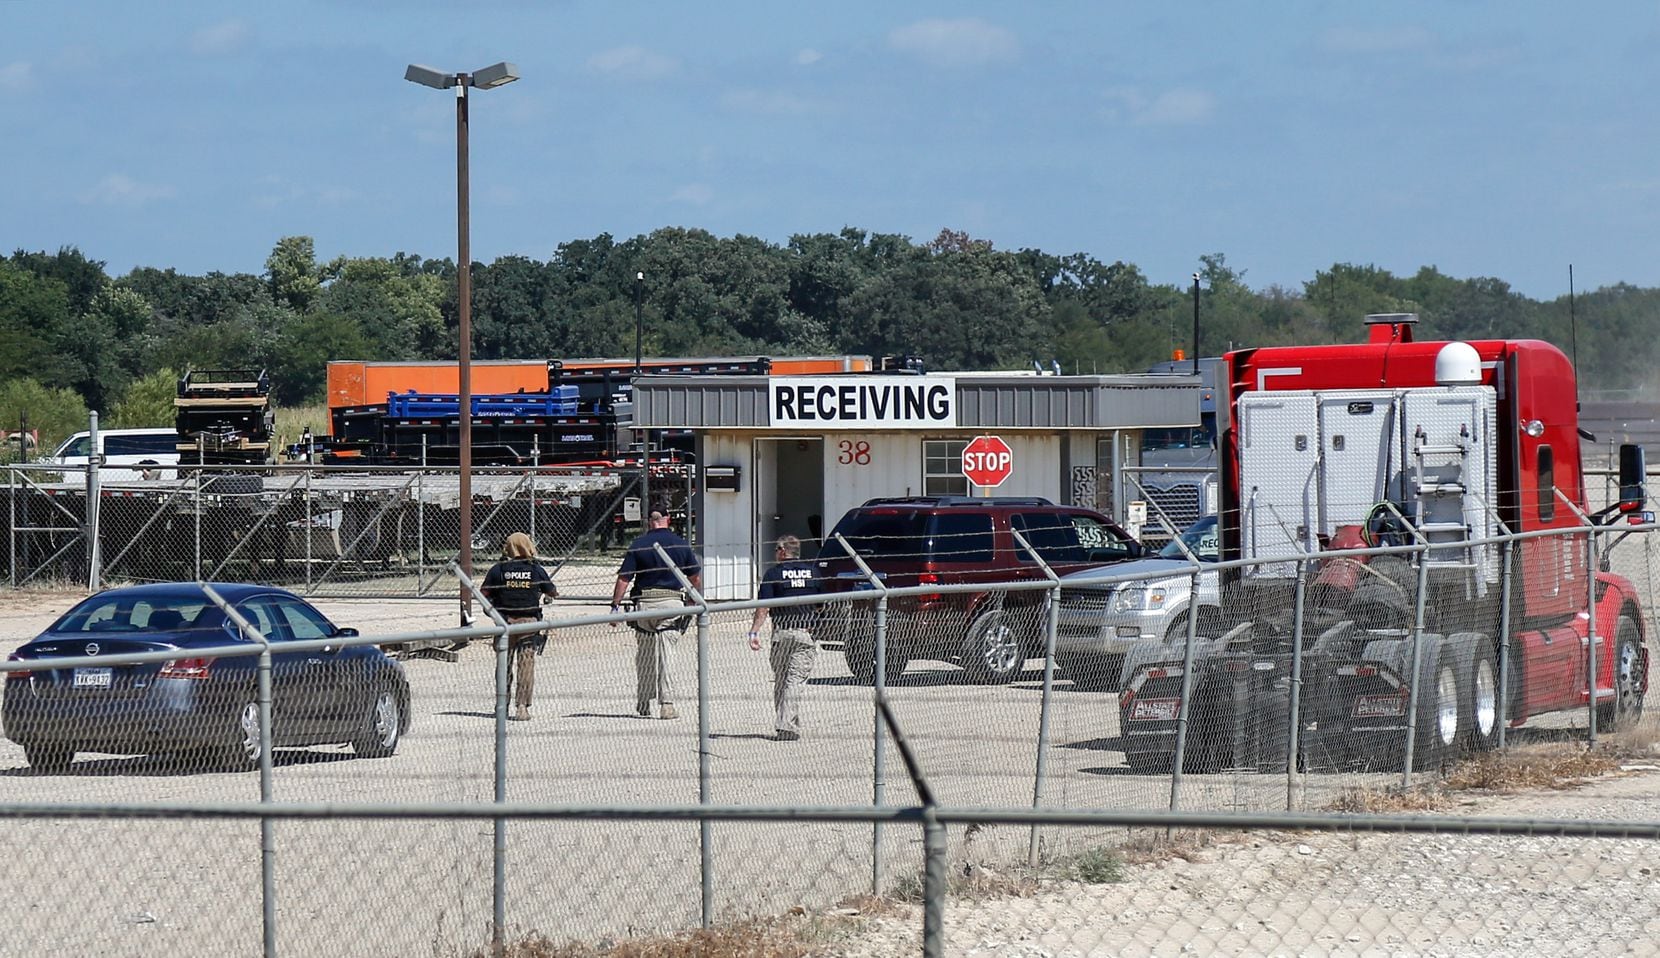 U.S. Immigration and Customs Enforcement agents are seen at the receiving gates of Load...